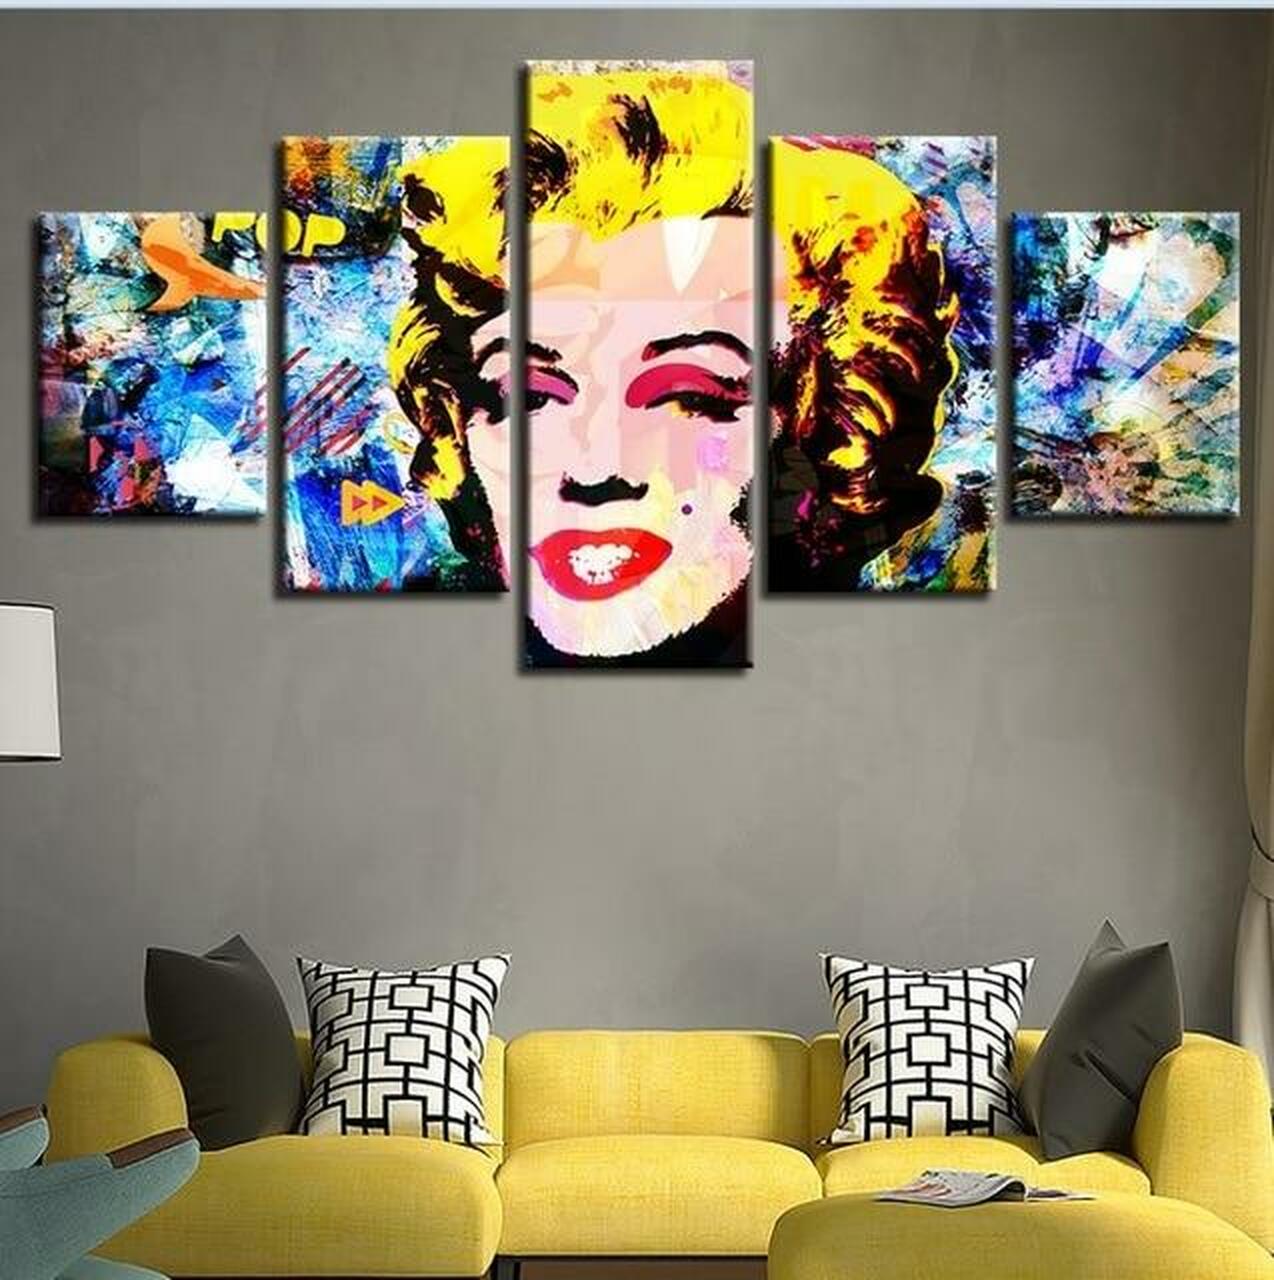 Marilyn Loved Colors 5 Piece Canvas Art Wall Decor